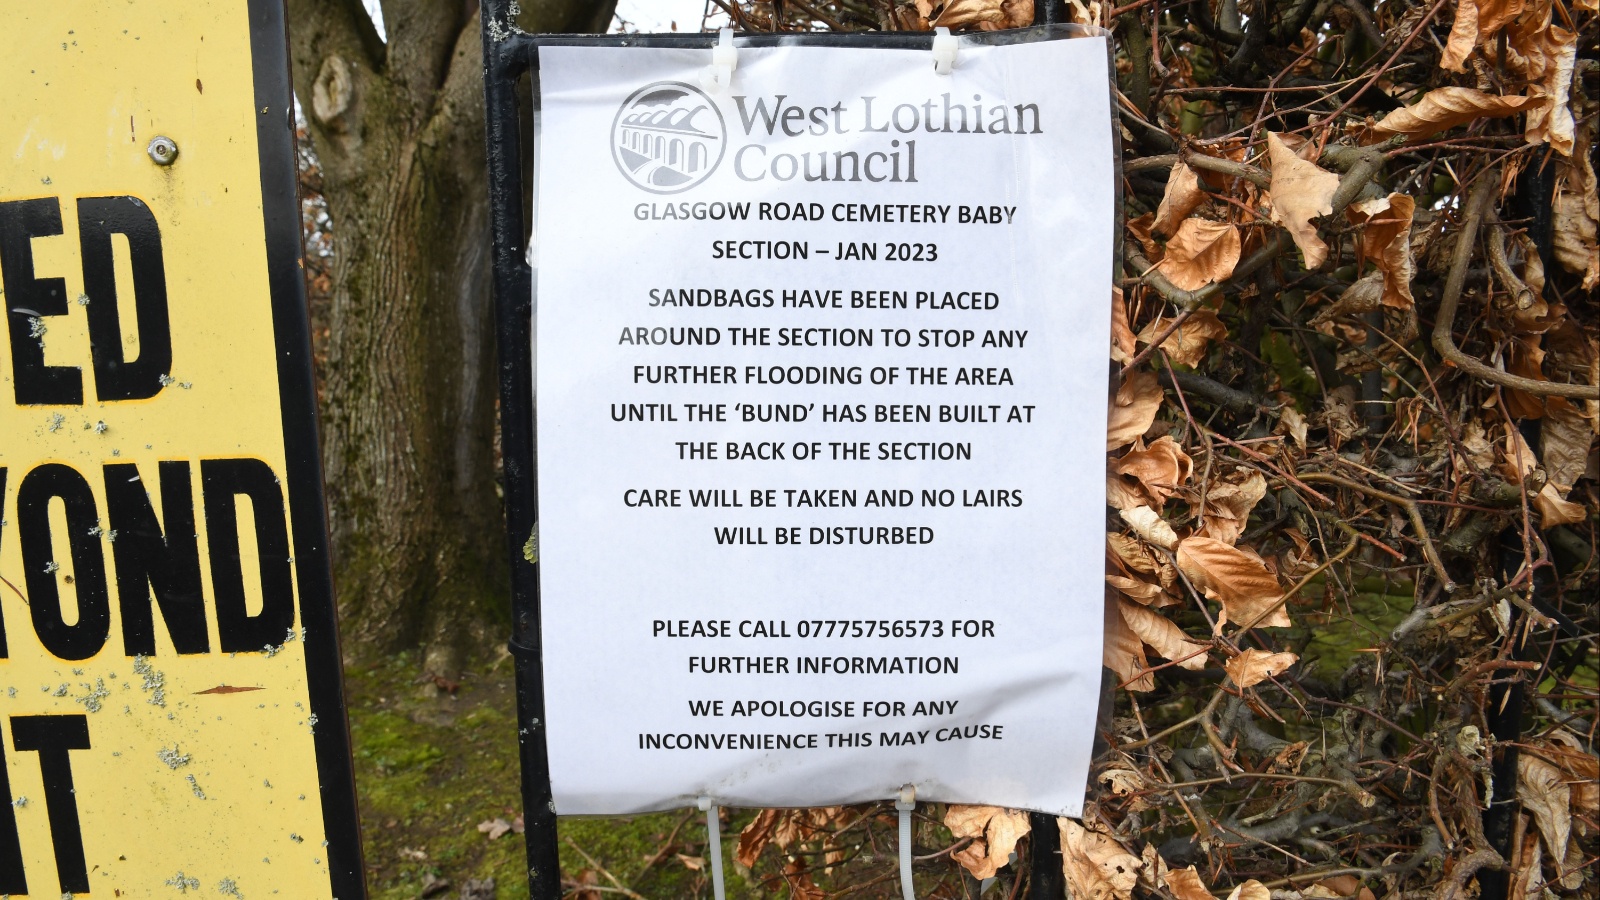 A notice of the work being carried out was attached to the cemetery gates.